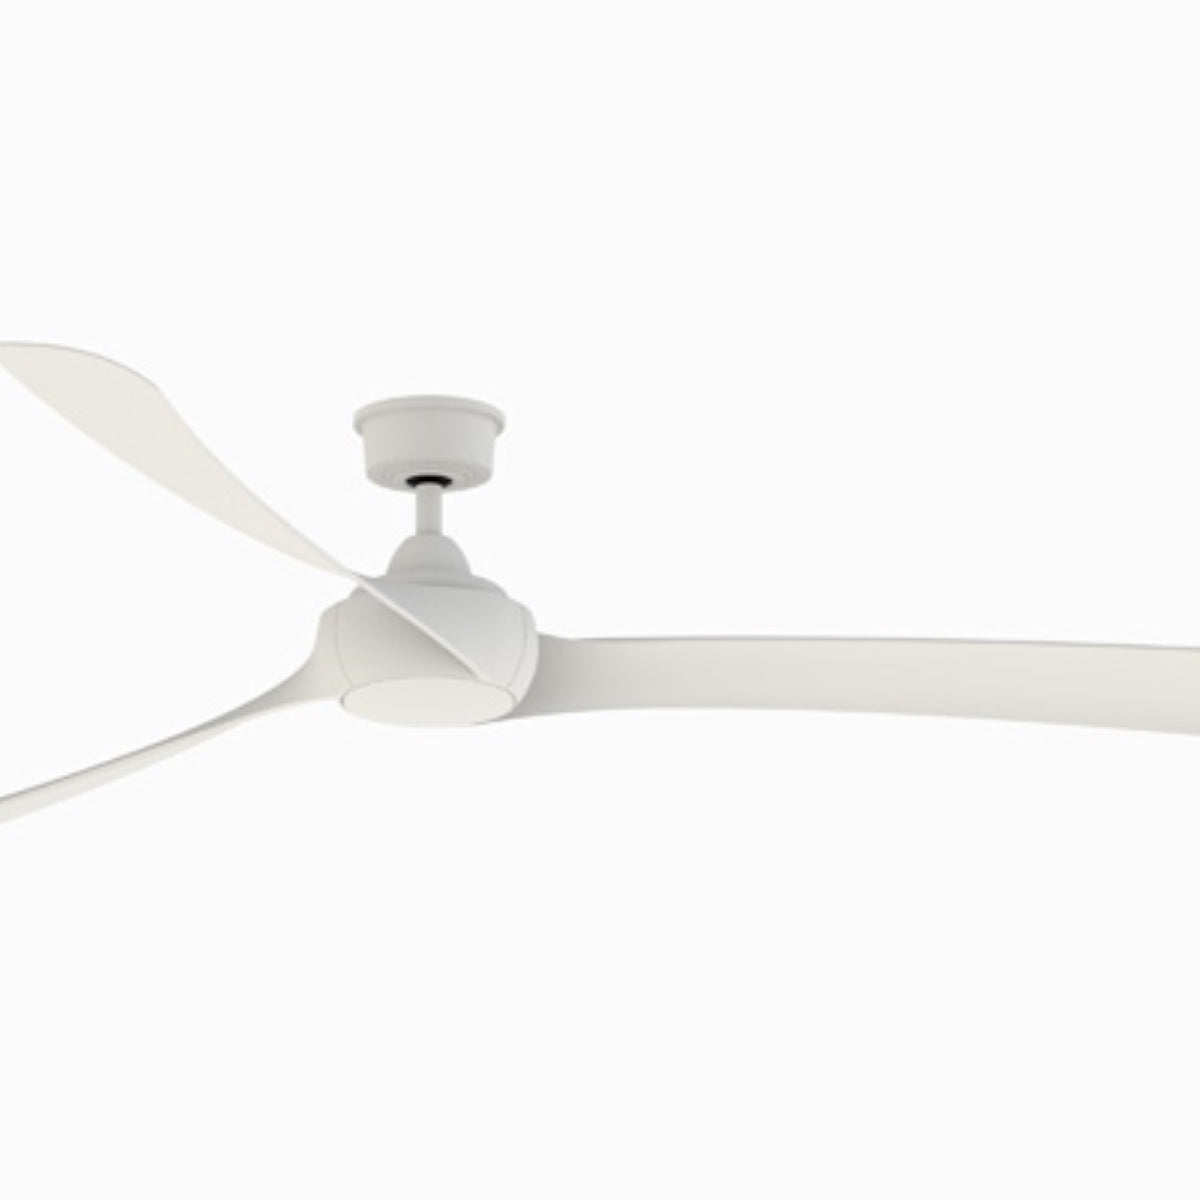 Wrap Custom Indoor/Outdoor Ceiling Fan Motor With Remote, 64-84" Blades Sold Separately